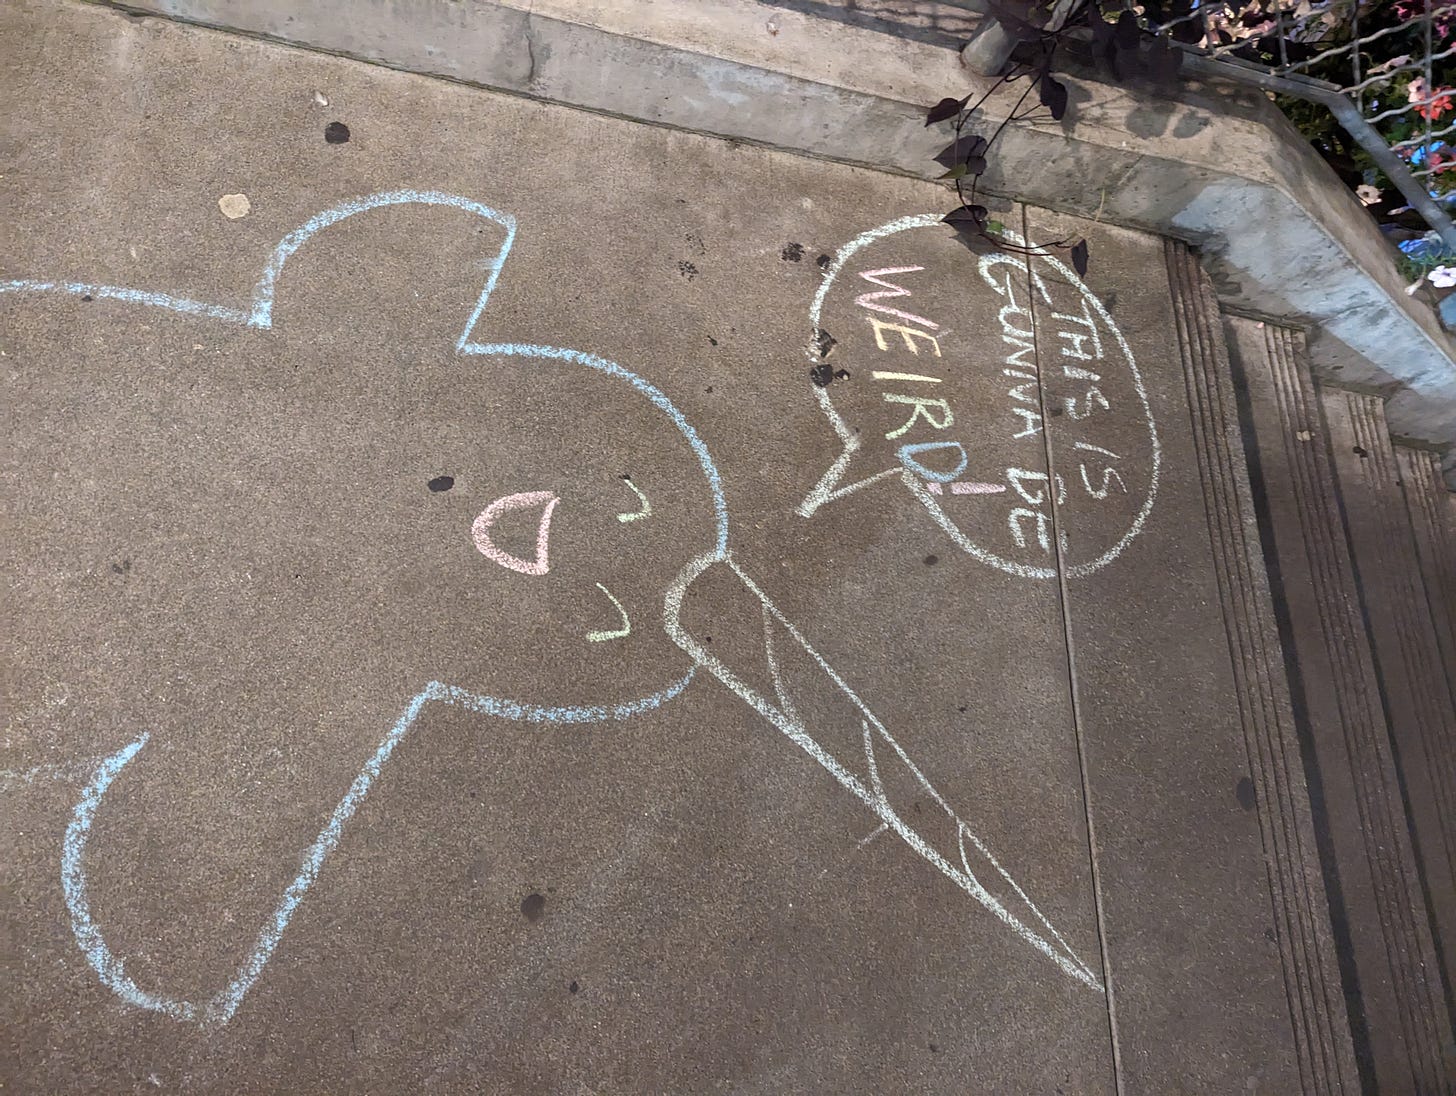 A narwale drawing in chalk on the sidewalk with a text bubble coming from it saying "This is going tio get weird!"